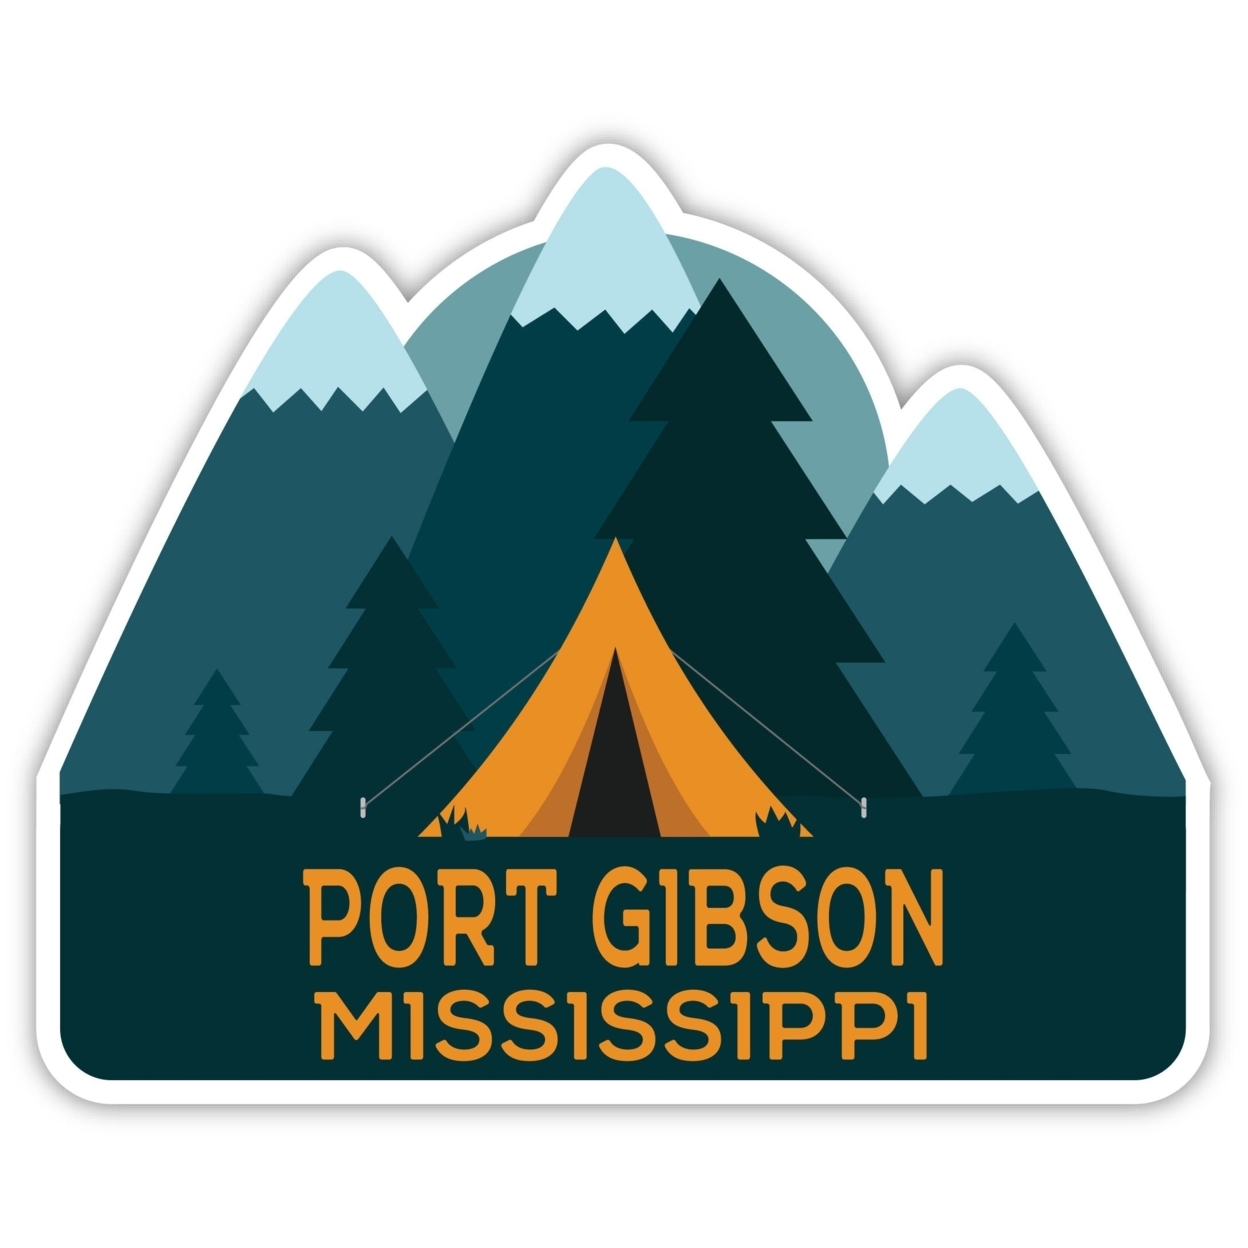 Port Gibson Mississippi Souvenir Decorative Stickers (Choose Theme And Size) - Single Unit, 4-Inch, Tent